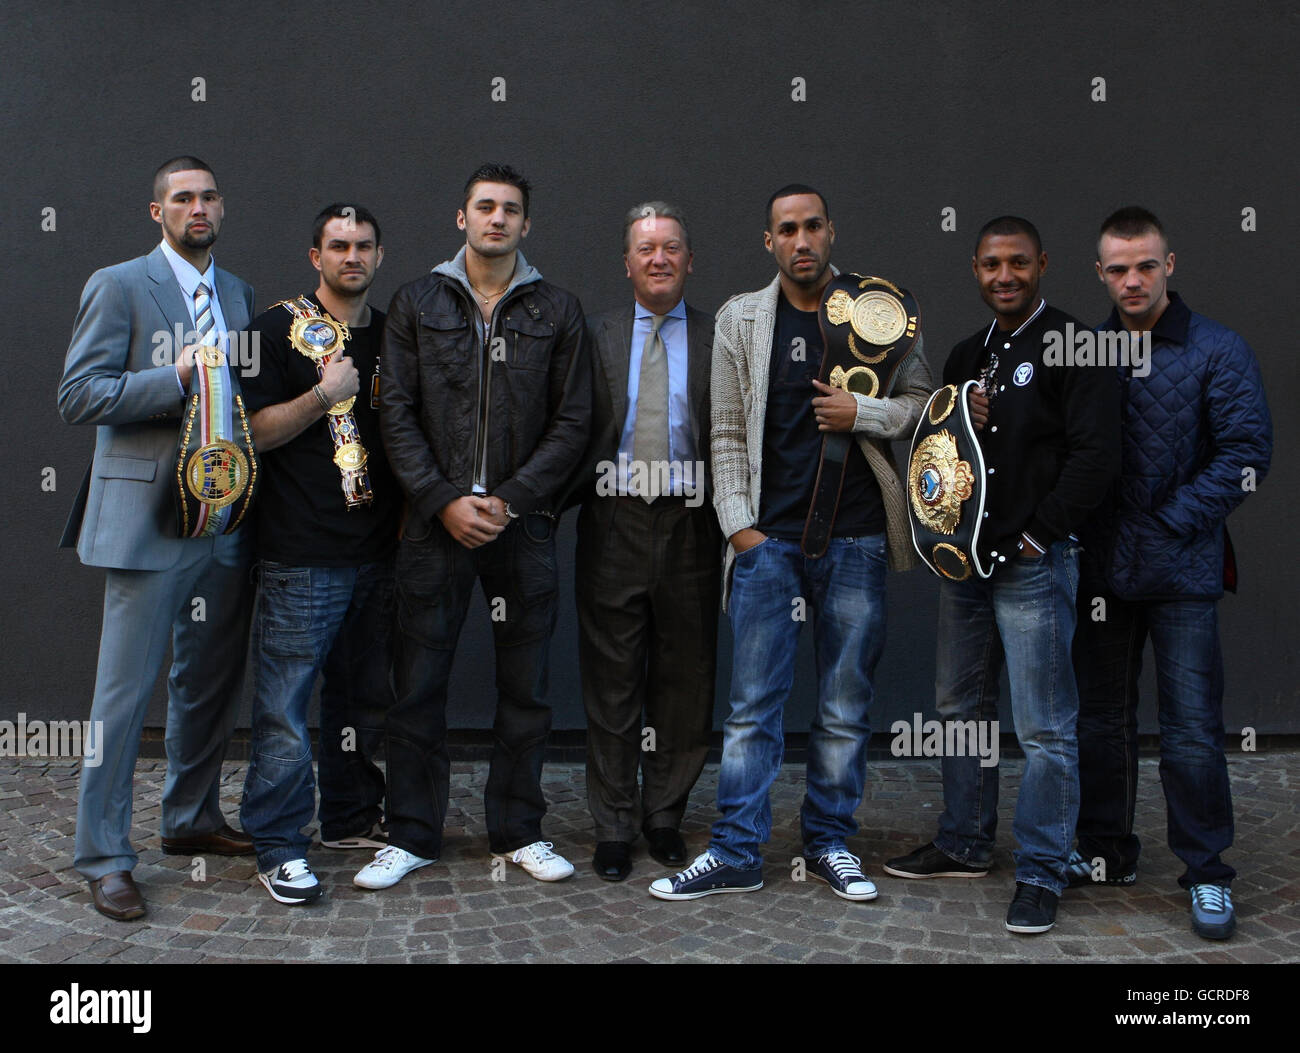 Frank Warren Boxing Promoter (centre) with his fighters from left) Liverpool's Tony Bellew and Paul Smith, Wales' Nathan Cleverly, Olympic Champion James DeGale, Sheffield's Kell Brook and Birmingham's Frankie Gavin during a Press Conference at the Radisson Blu Hotel, Liverpool, ahead of the Liverpool Echo Arena show on December 11. Stock Photo